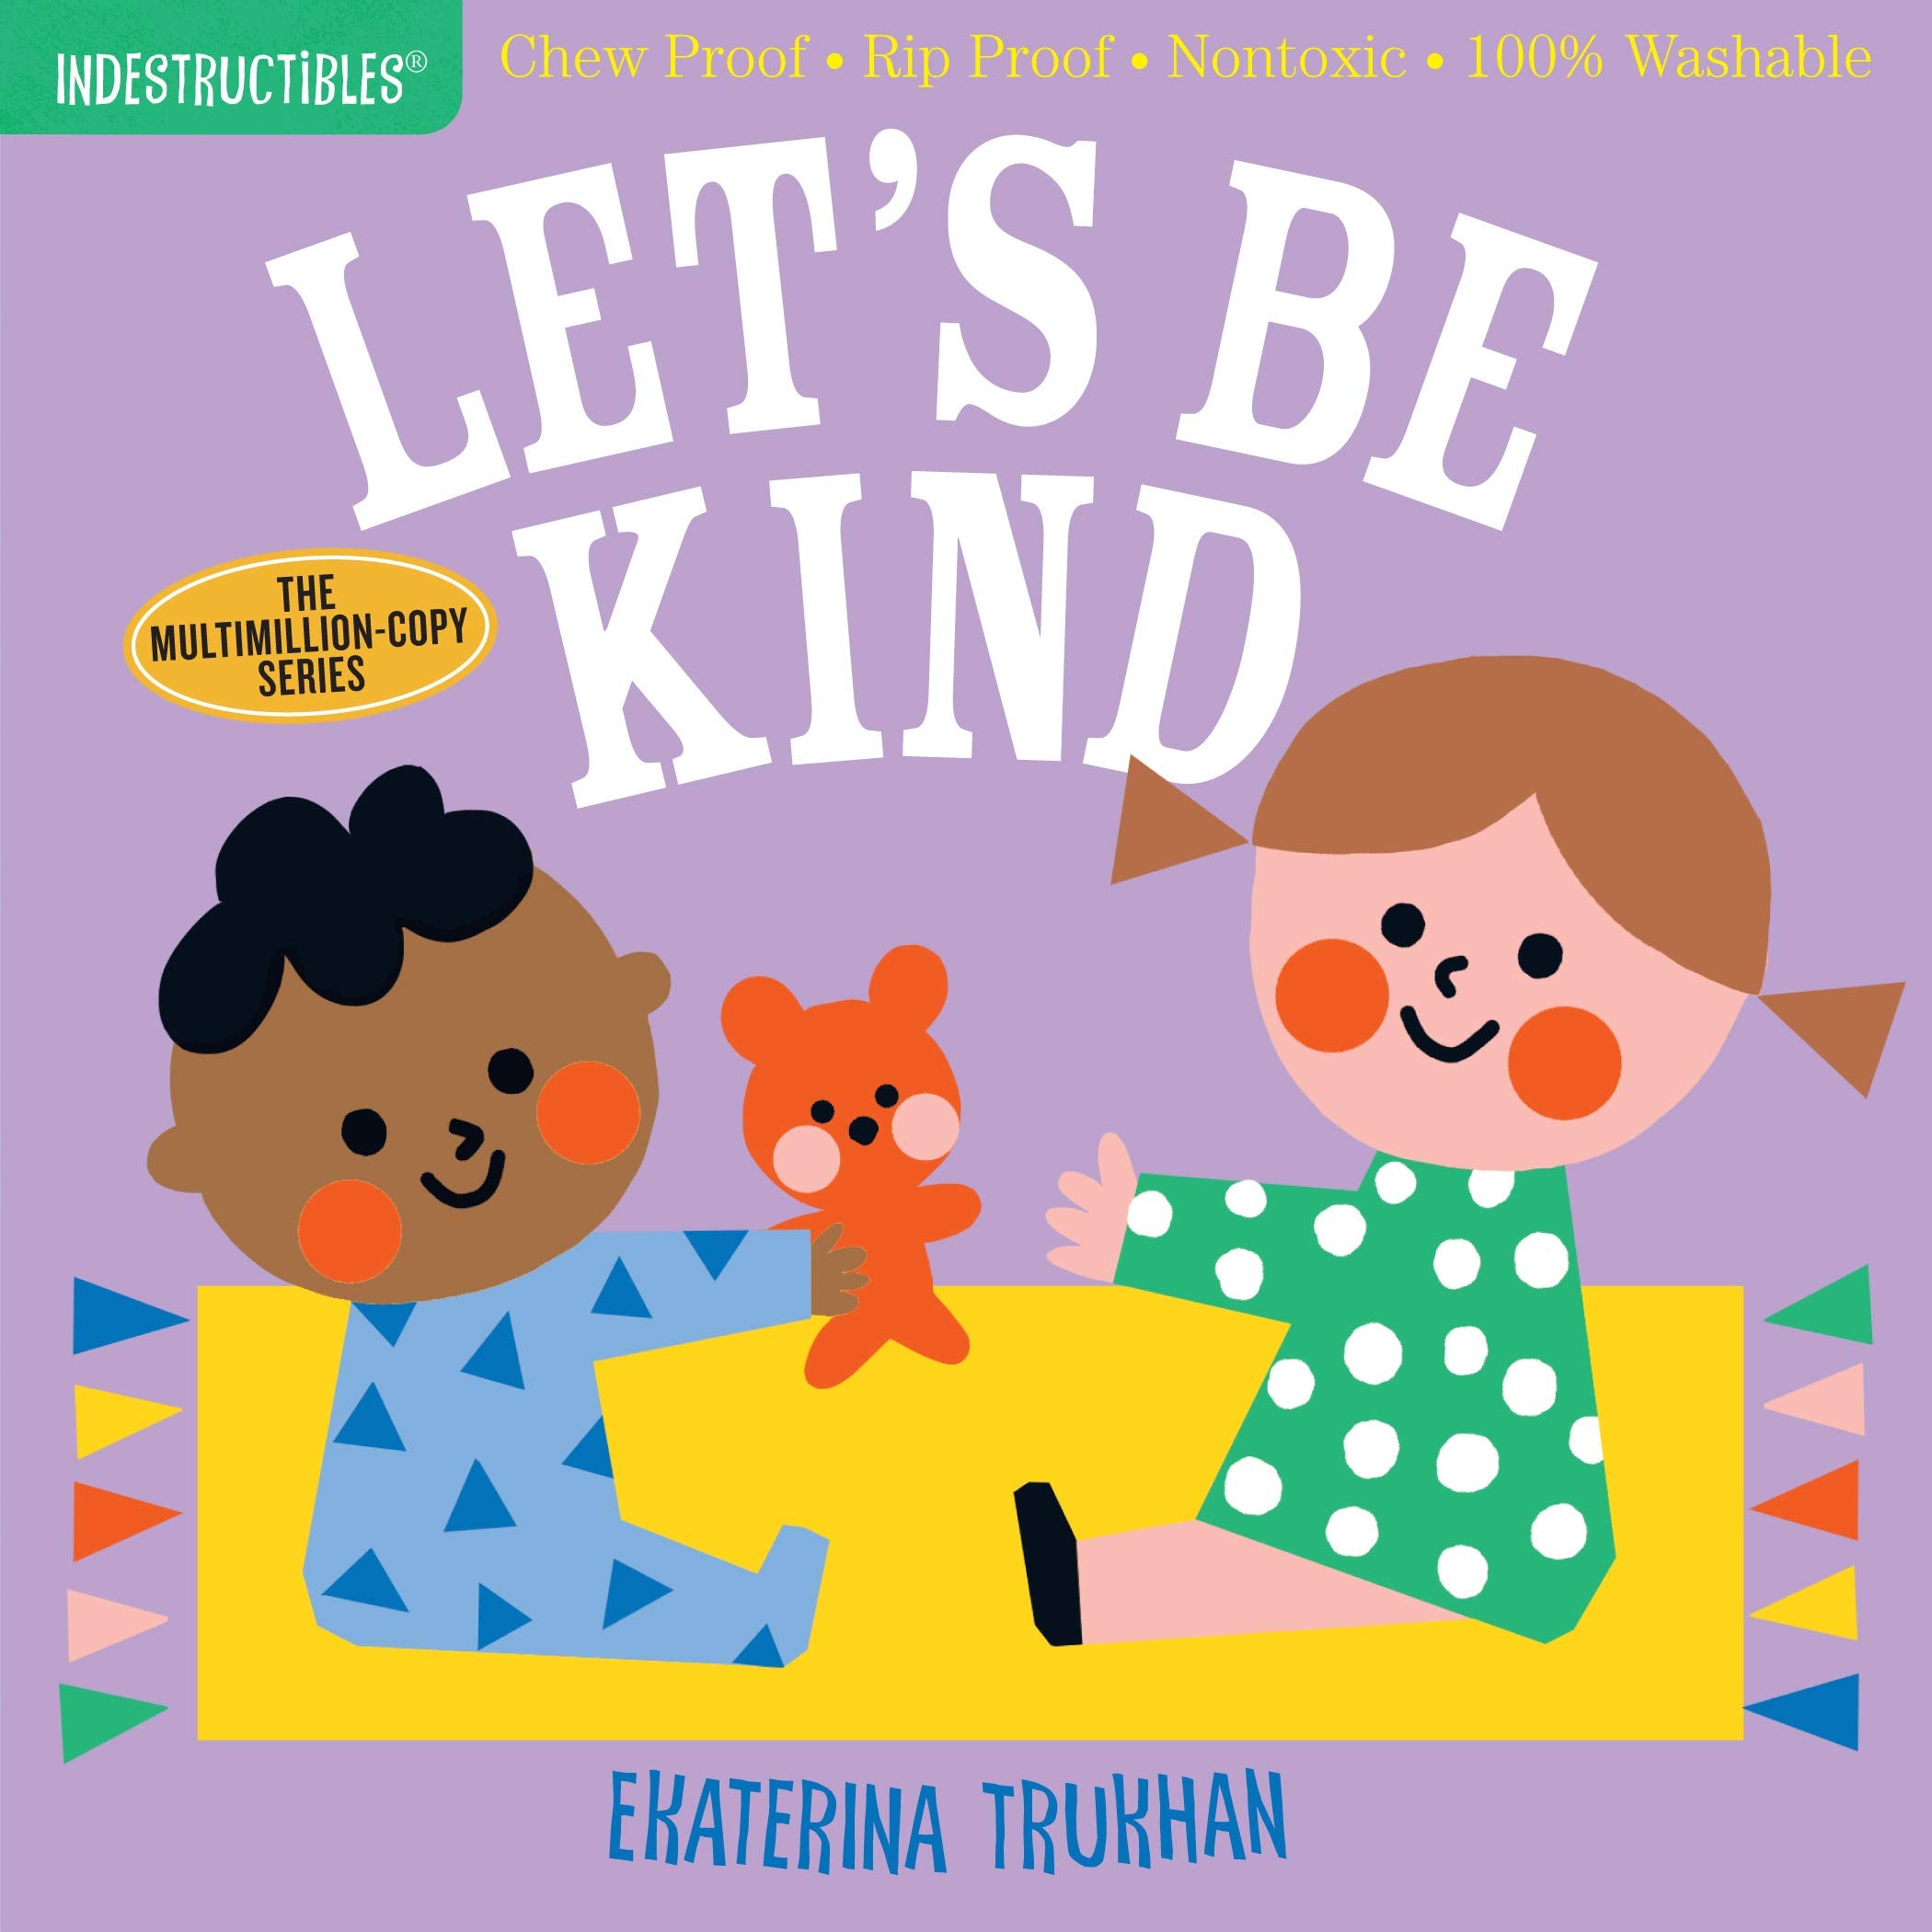 View Indestructibles: Let's Be Kind by Ekaterina Trukhan